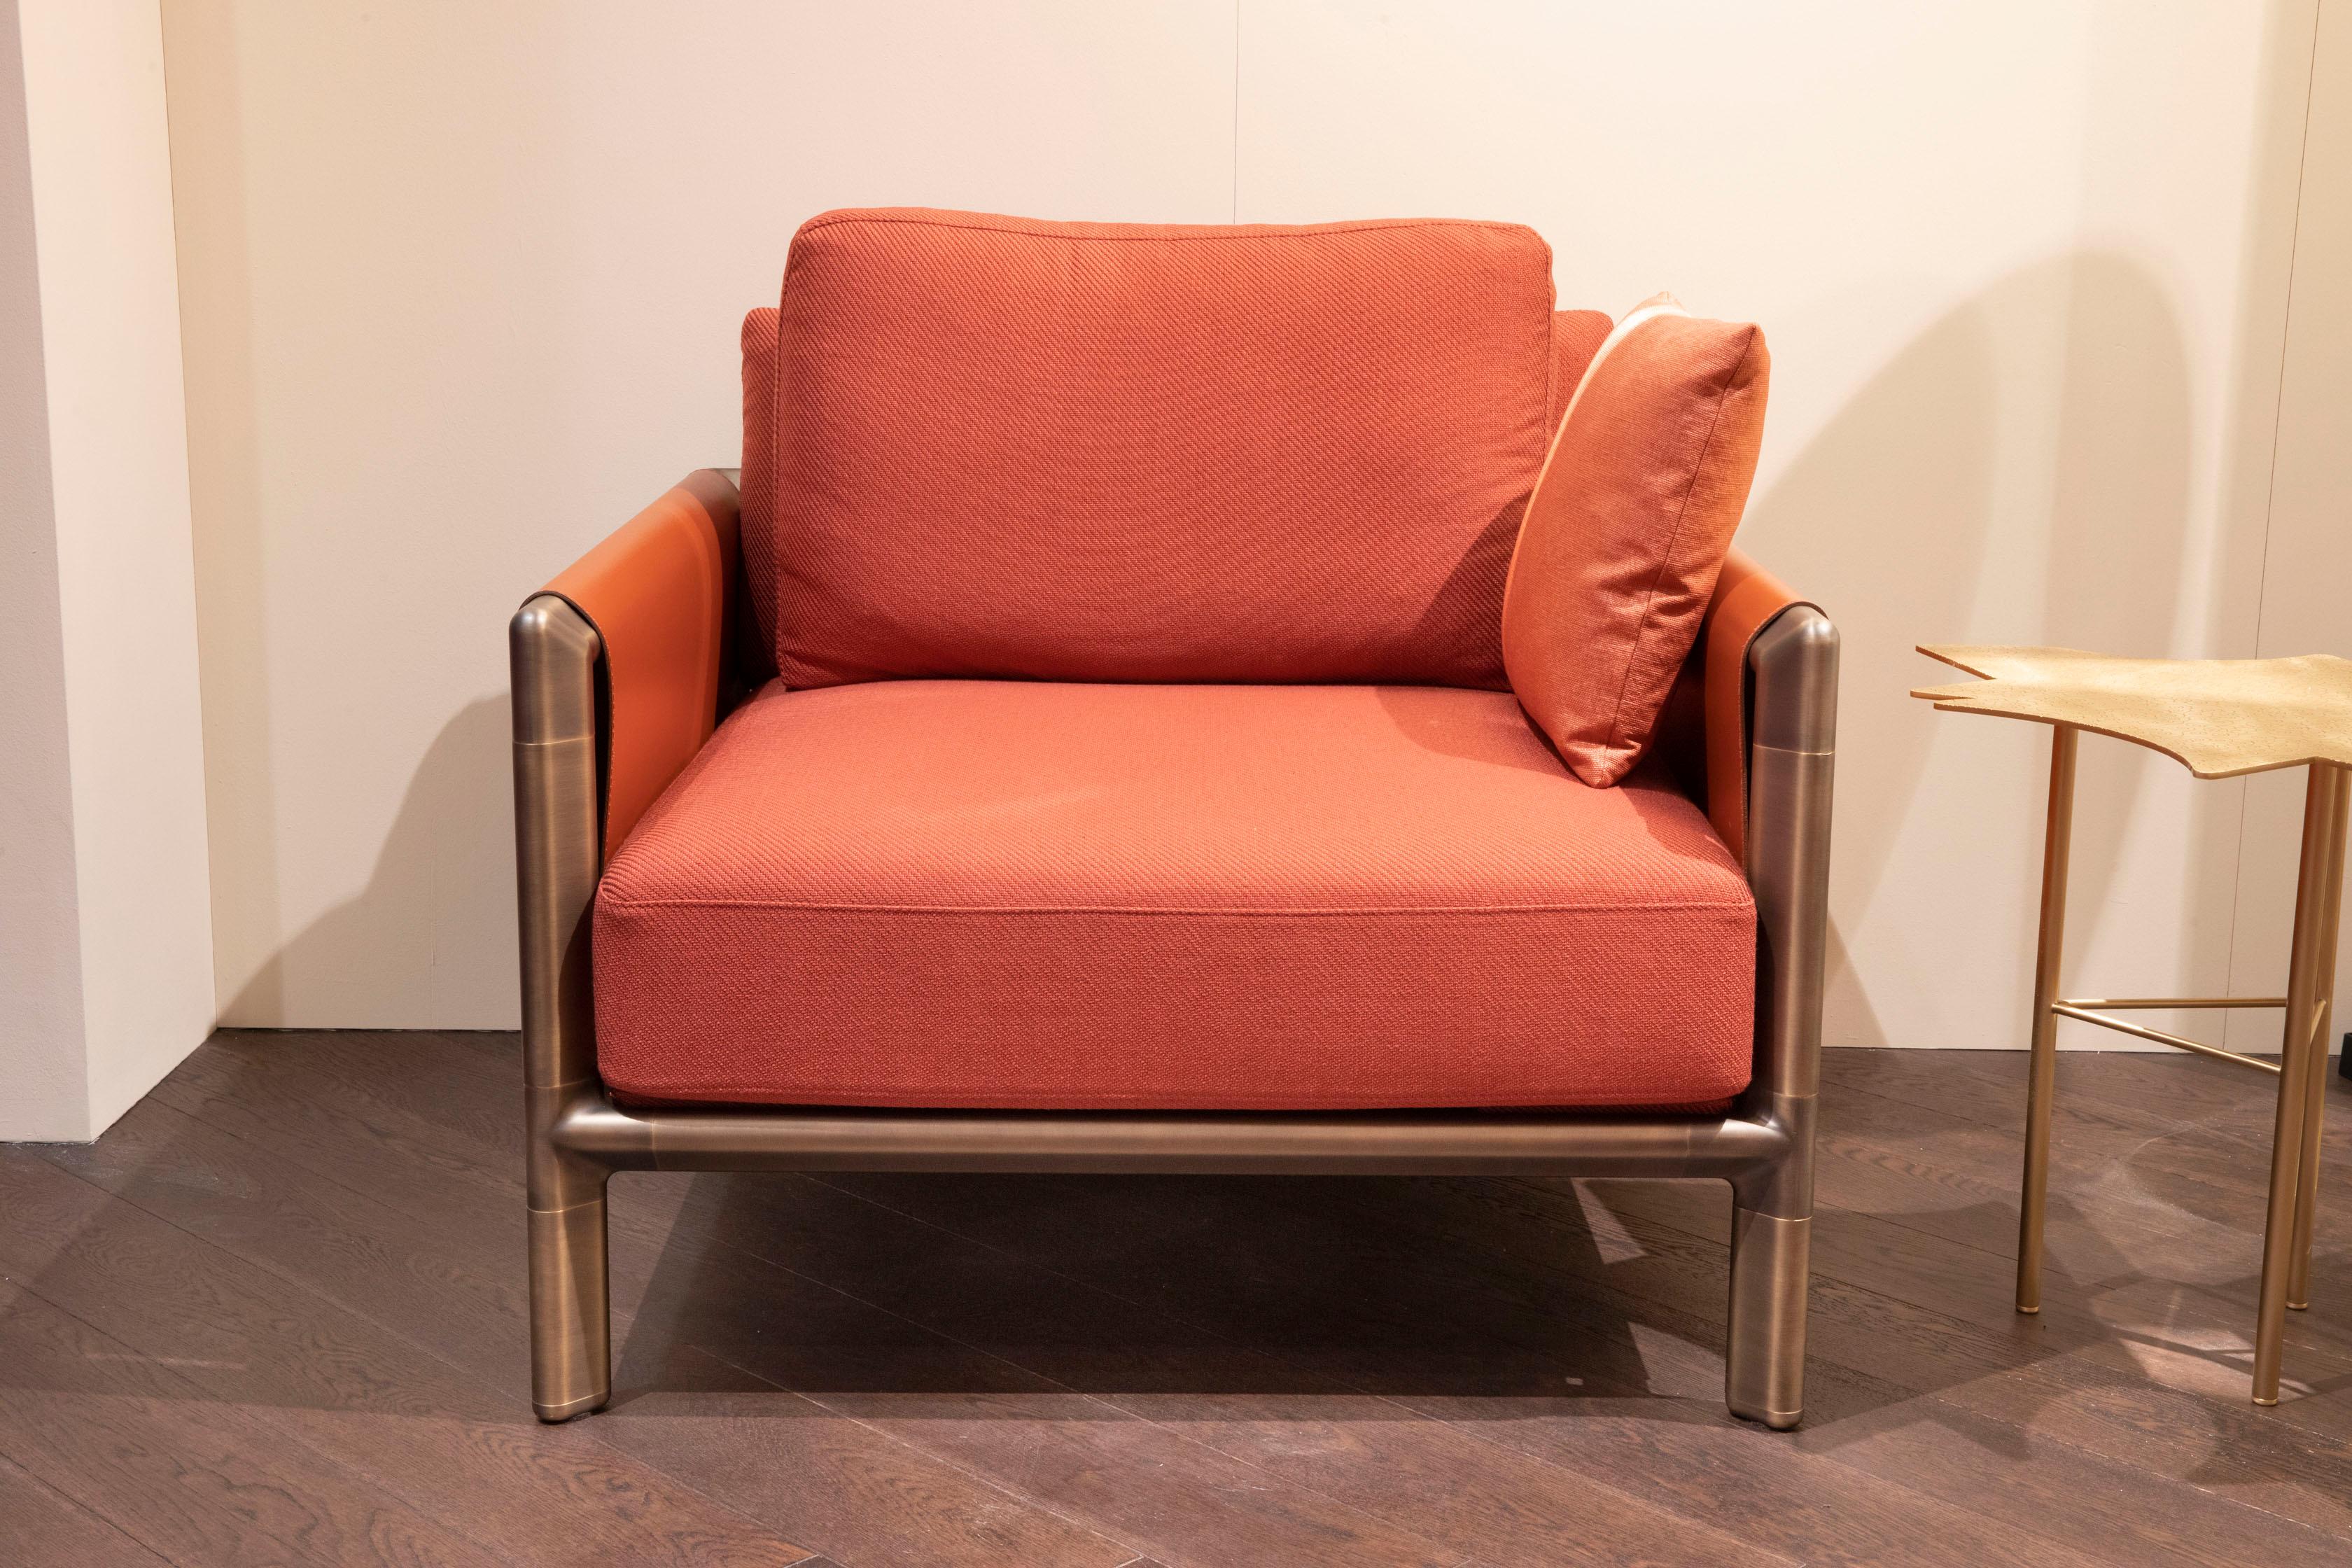 Ghidini 1961 Frame Armchair with Arms in Cuoio Leather by Stefano Giovannoni For Sale 4